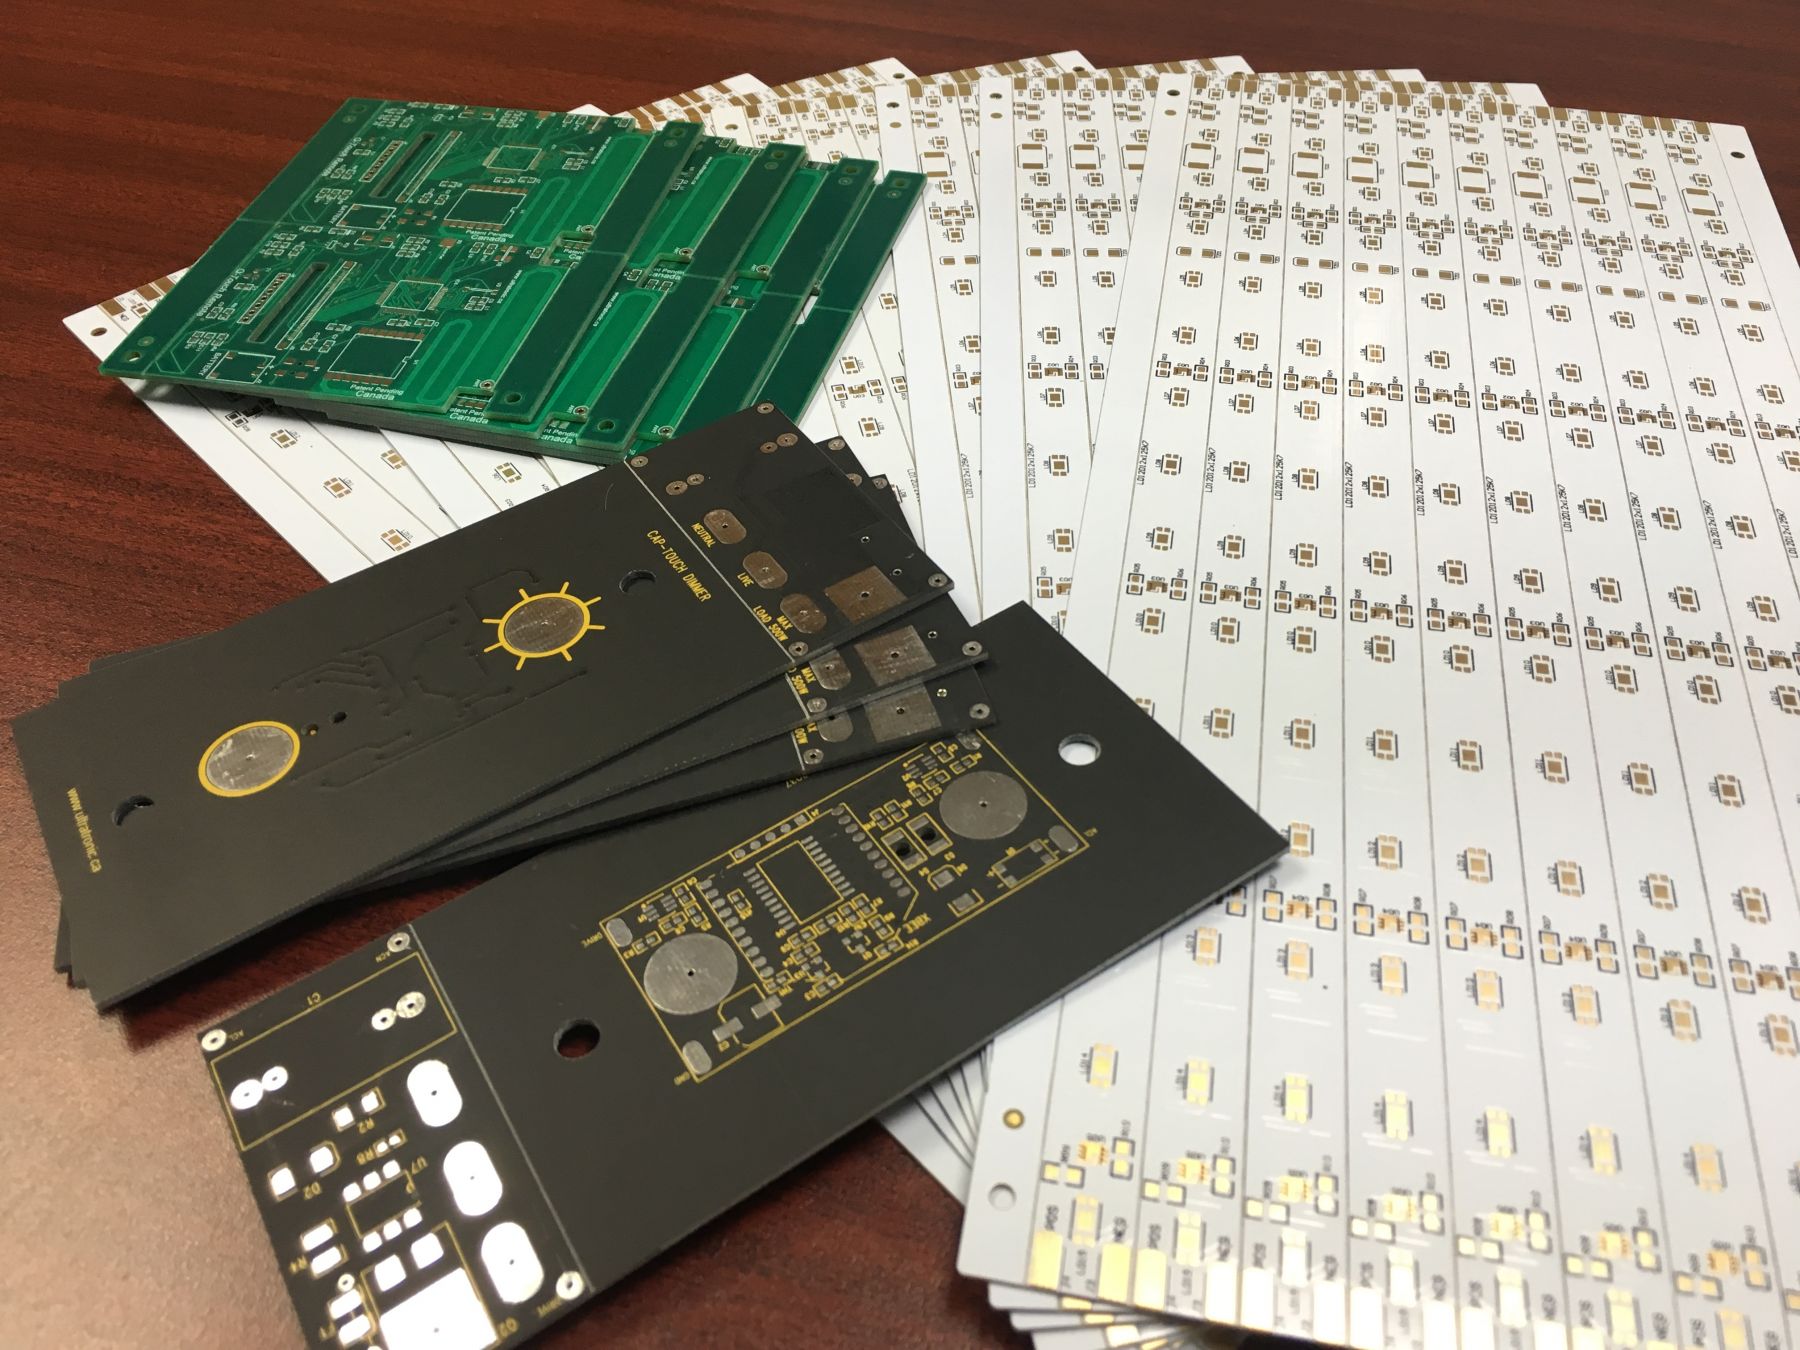 Service Ultratronic , your best source for high quality, low cost Printed Circuit Boards.